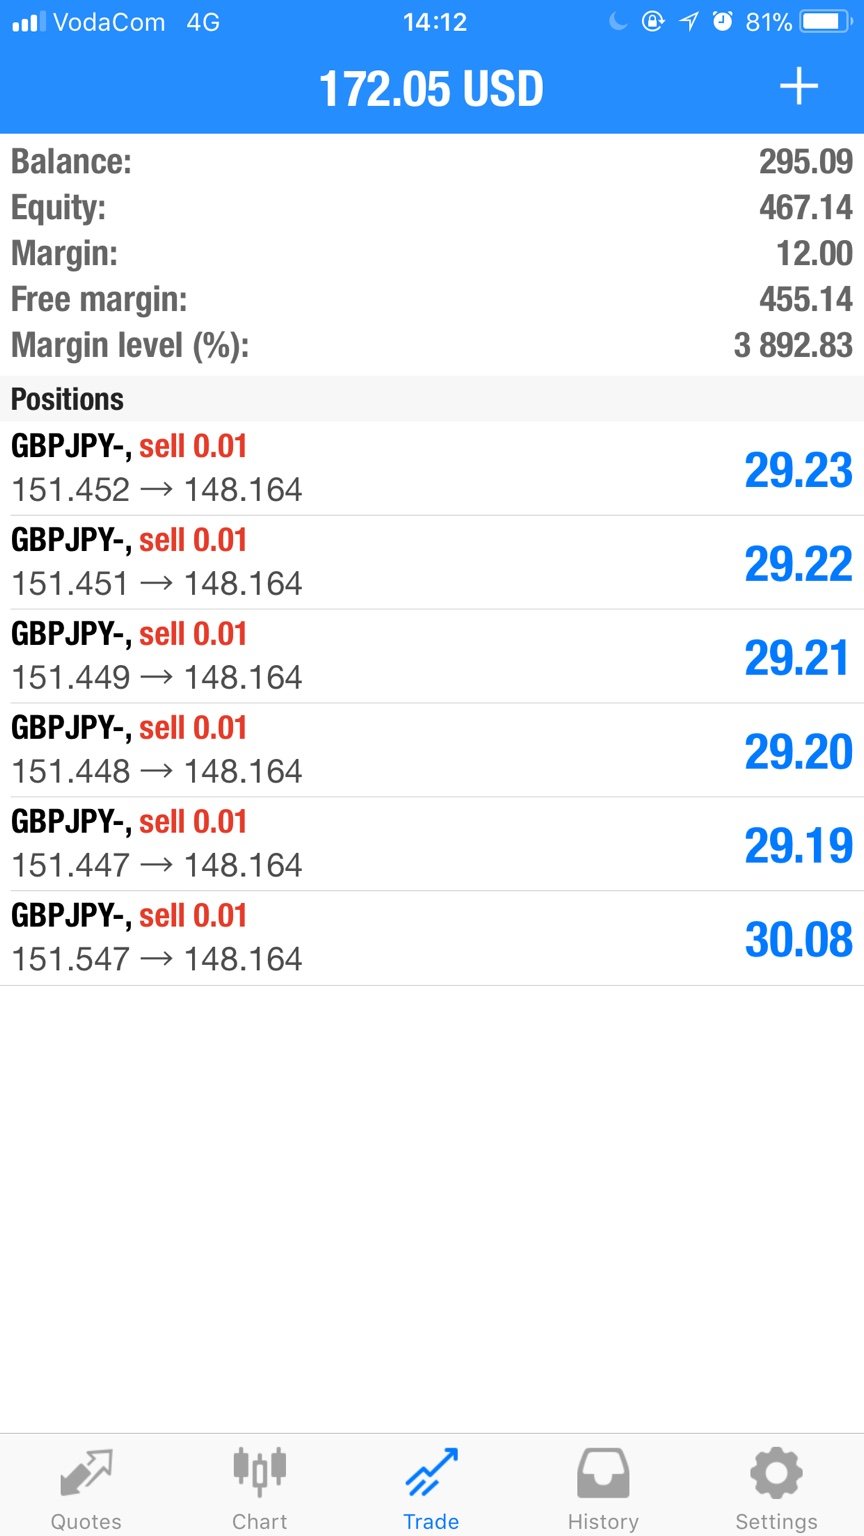 Lot sizes in forex